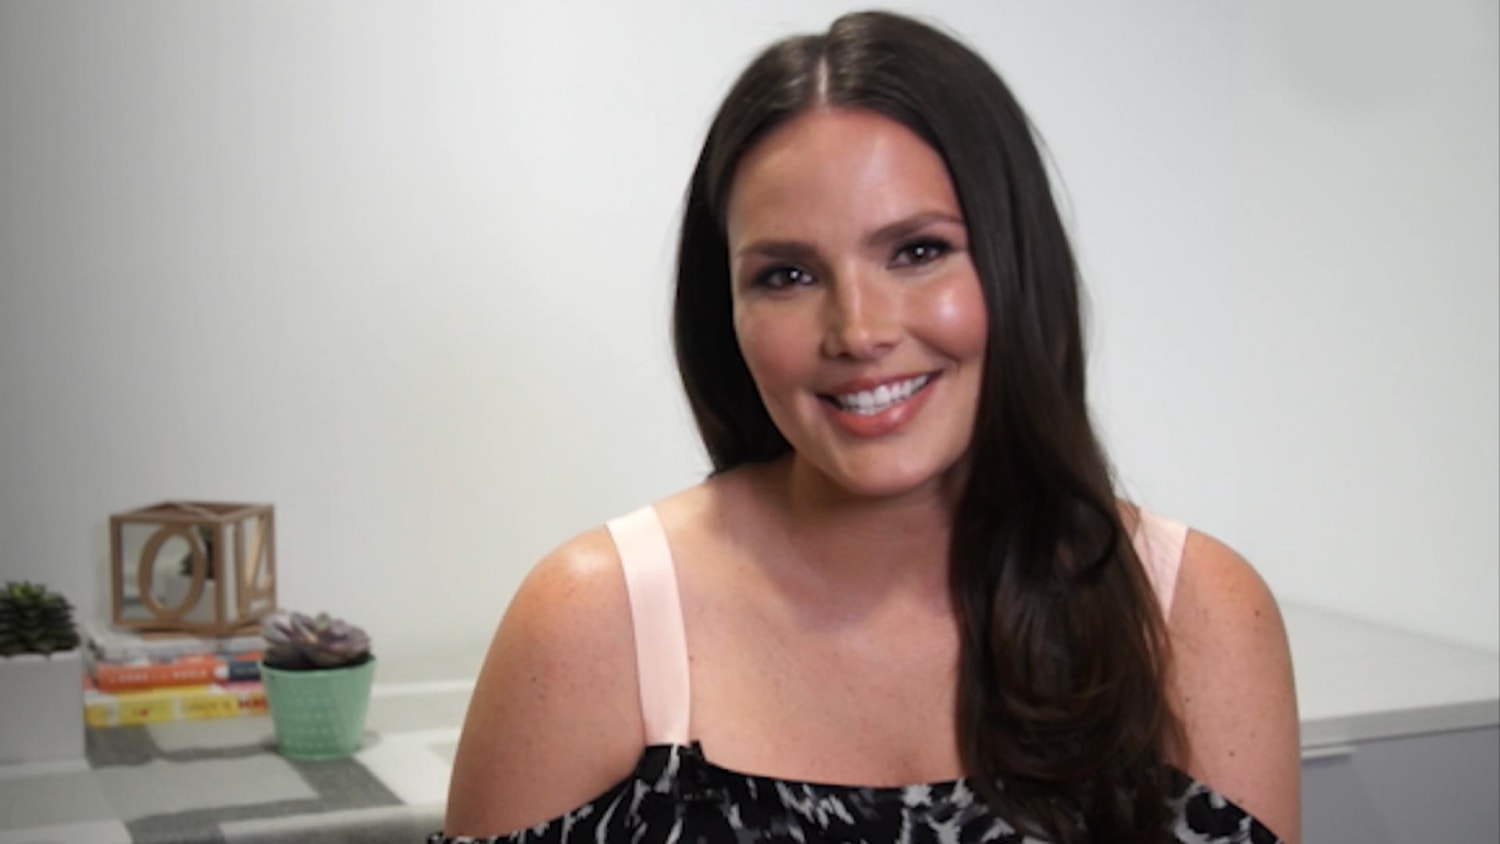 Plus-size model Candice Huffine on embracing her 'tummy' and 'rolls